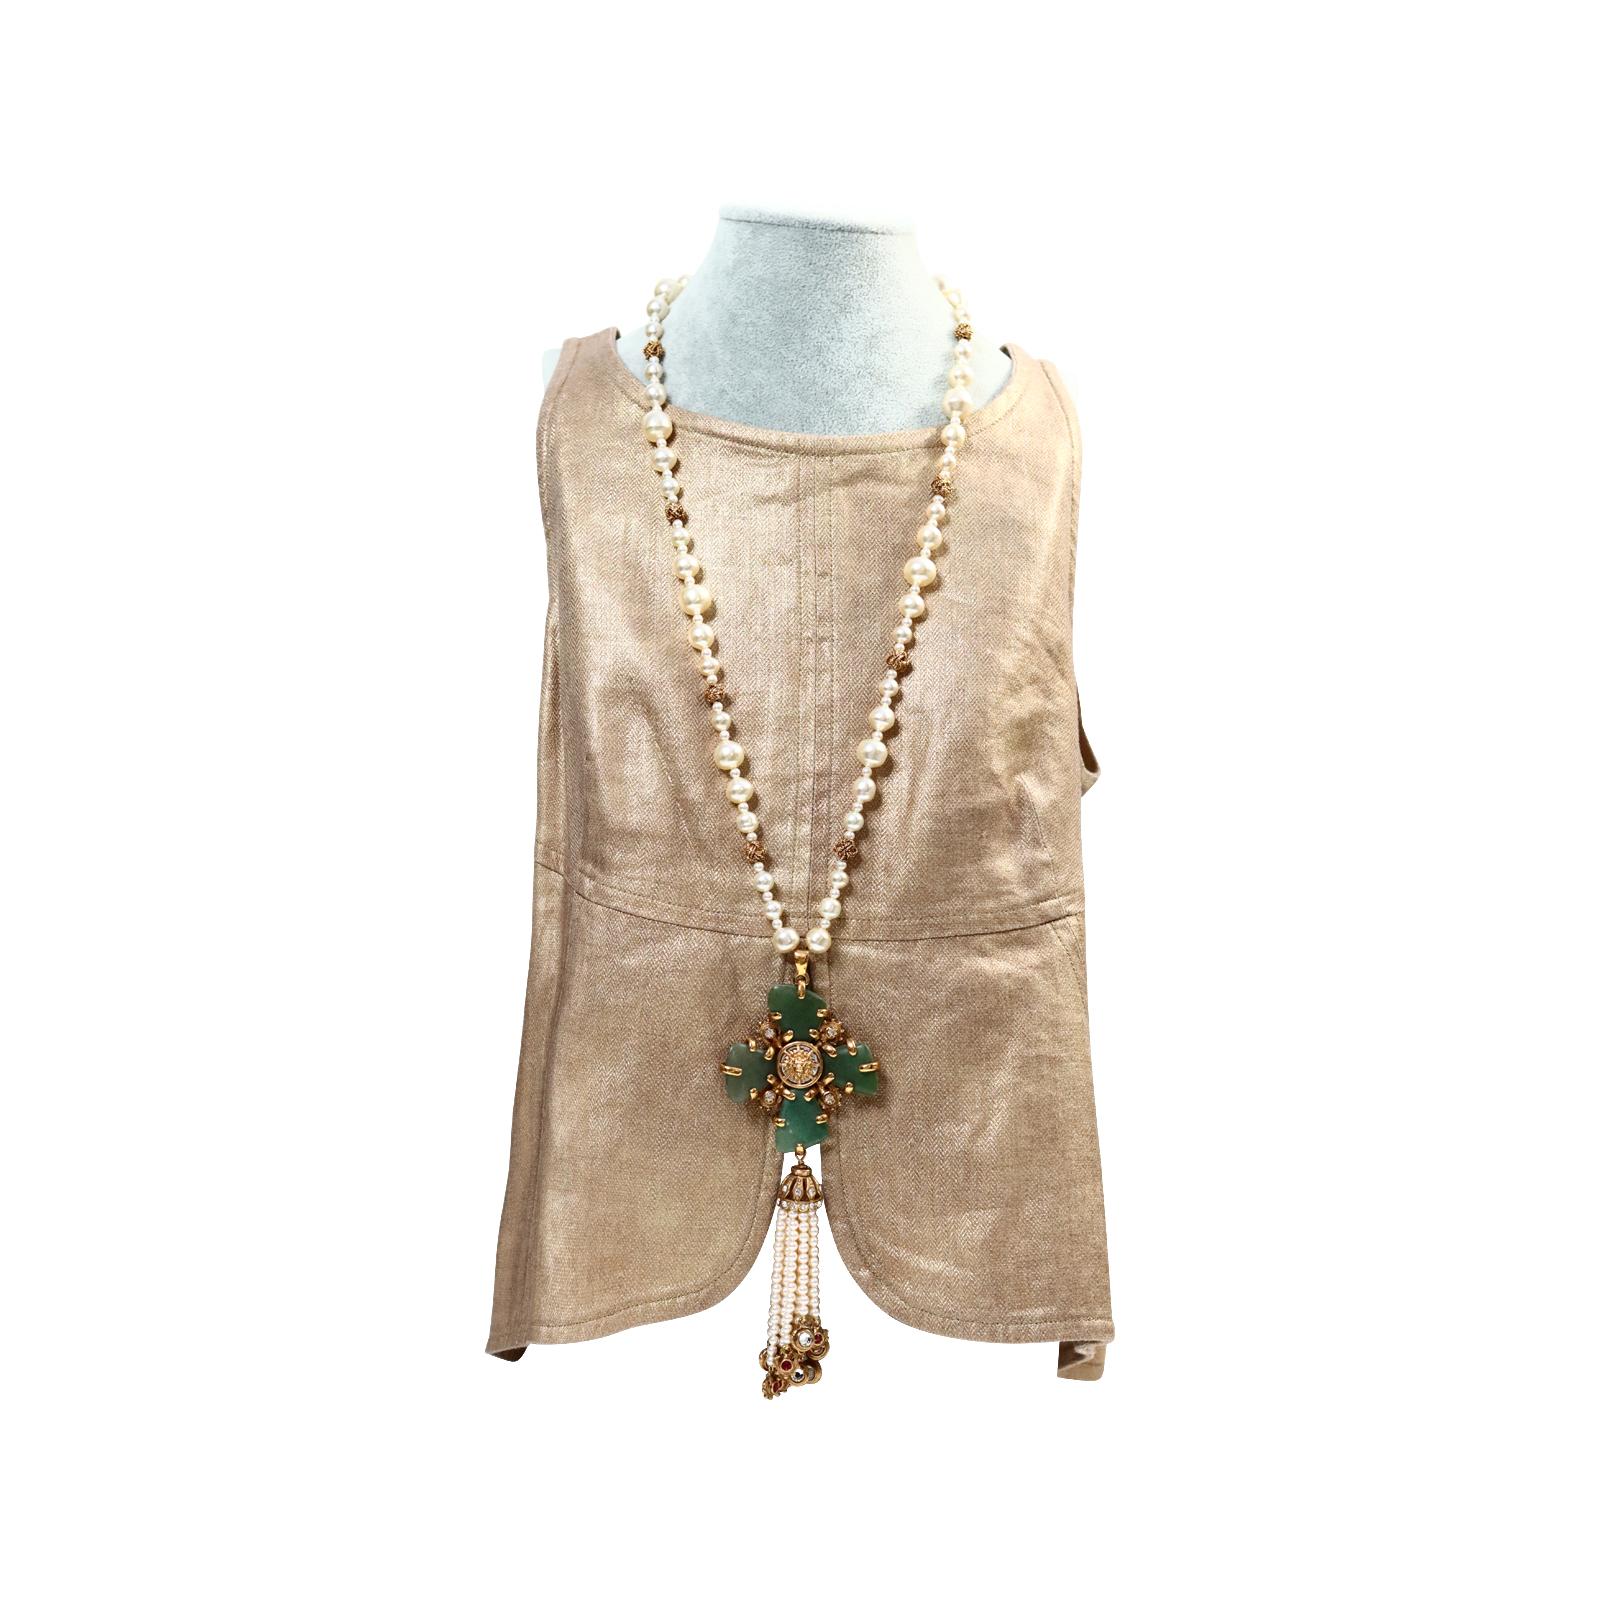 Collectible Chanel Couture Pearl with Green Cross and Dangling Pearls Circa 2005 For Sale 3